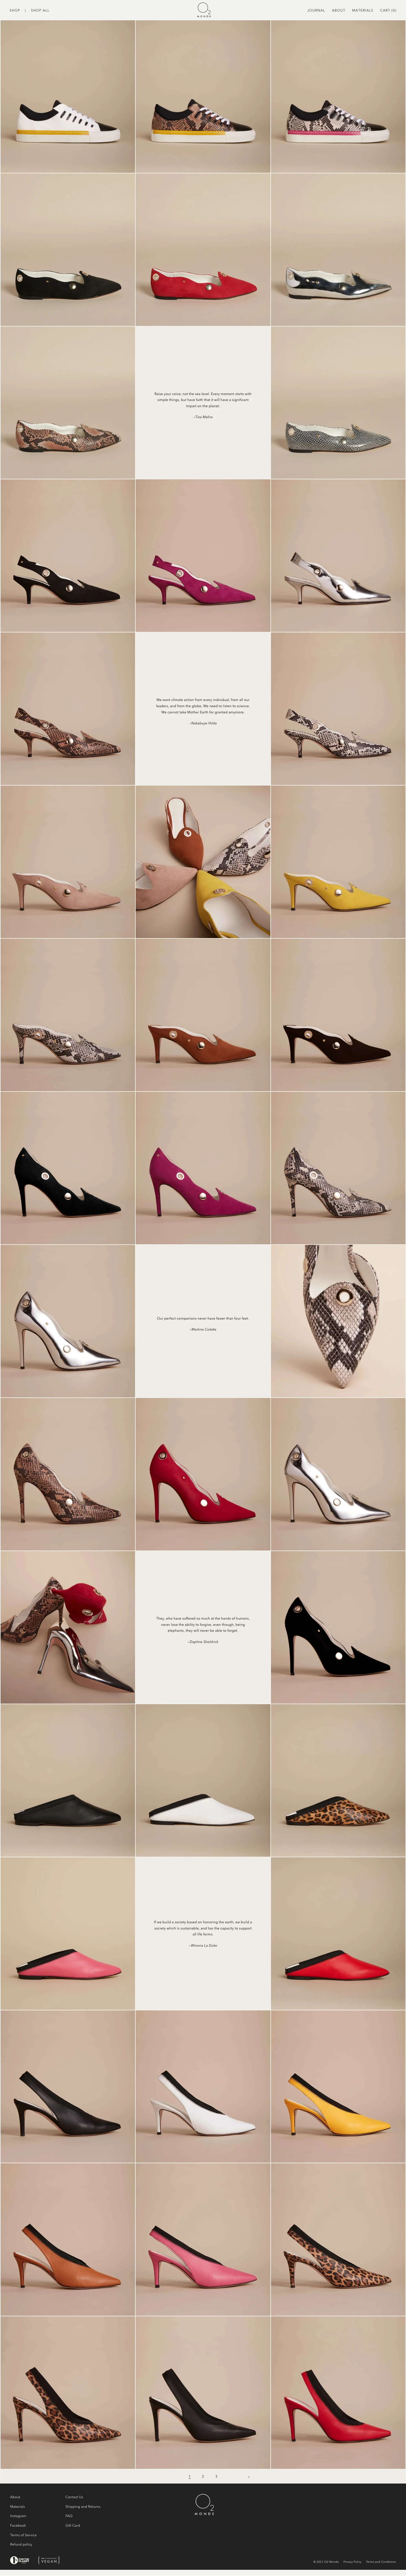 O2 Monde Landing Page Example: O2 Monde offers you the Eco Friendly and plant based women's shoes in timeless designs. We have the wide collection of handcrafted sustainable and luxury vegan women's dress shoes available online in USA.